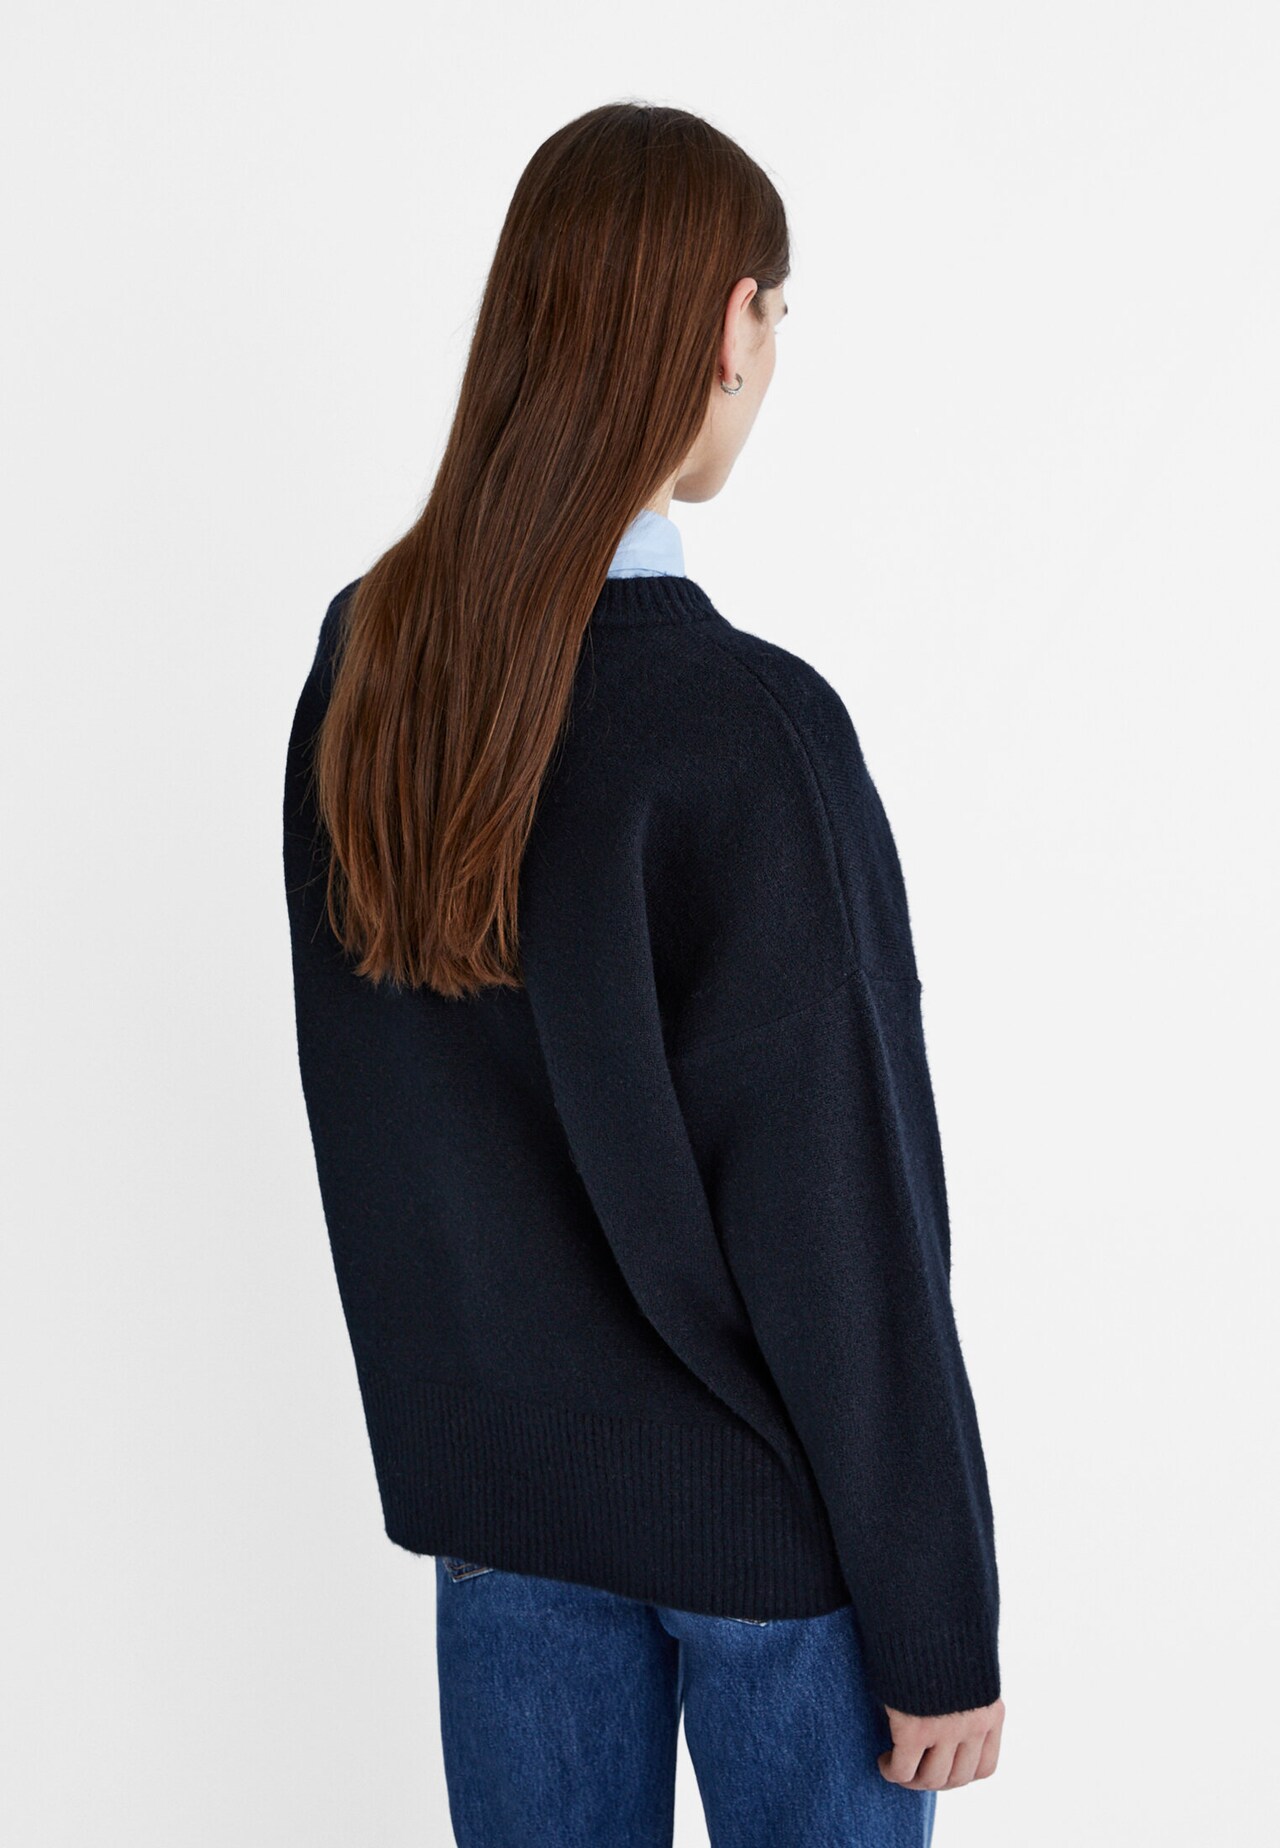 Soft-touch knit sweater